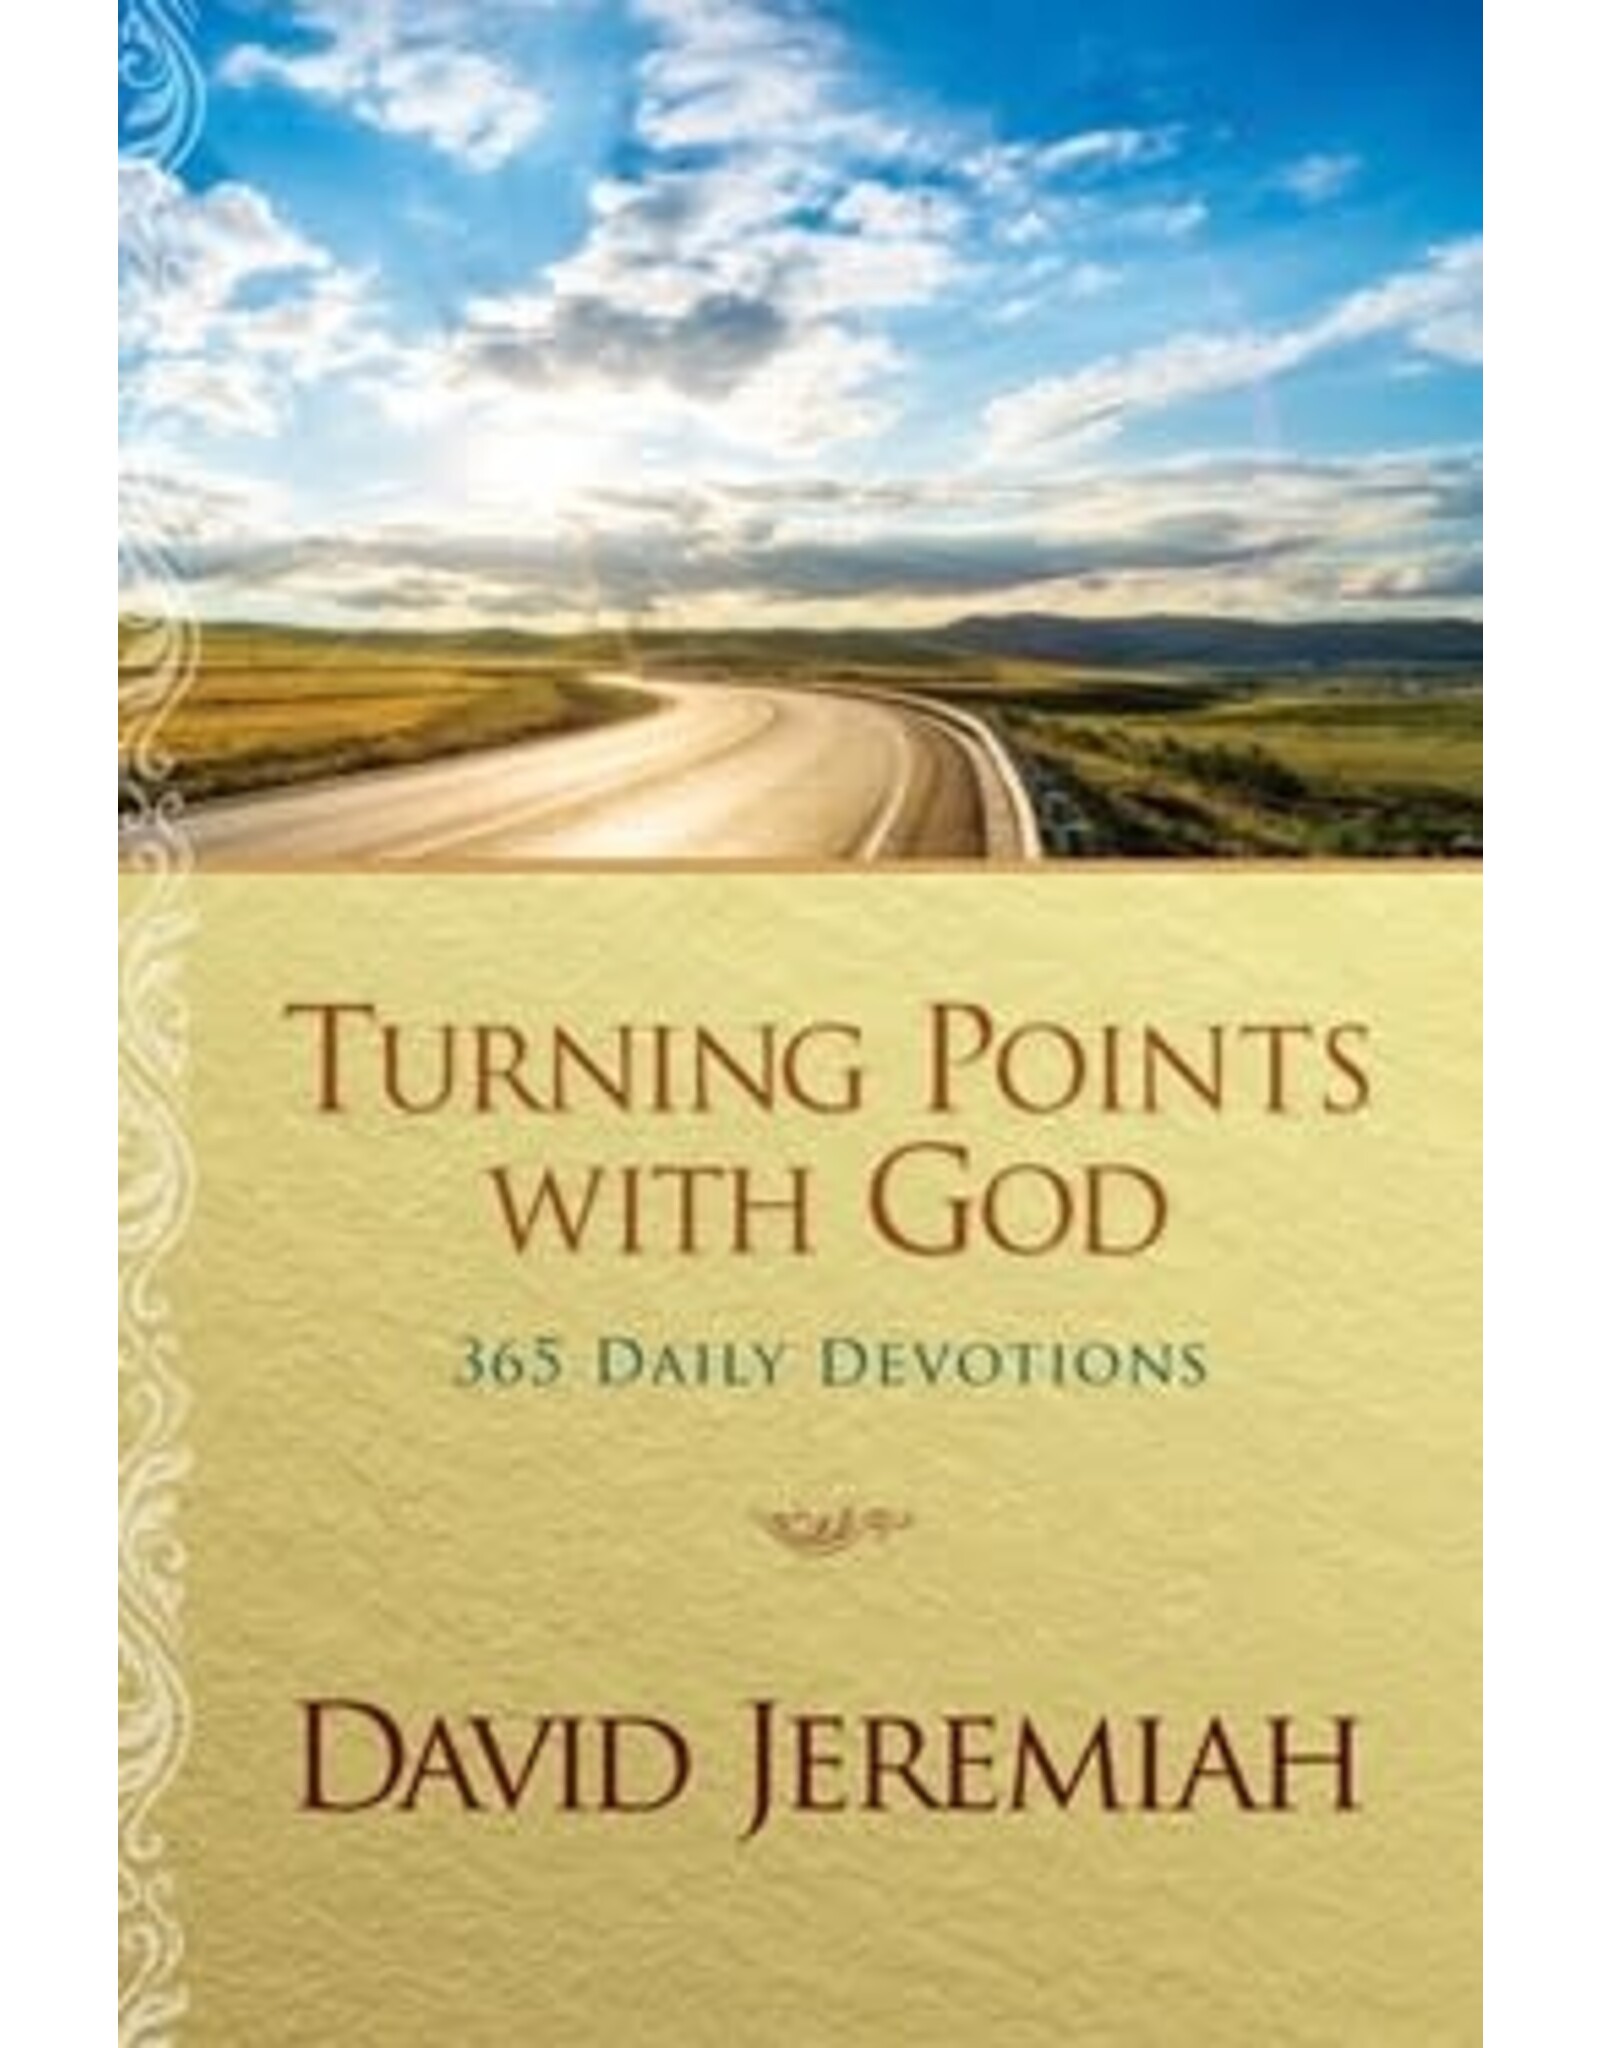 Turning Points with God 365 Daily Devotions by David Jeremiah -  Soft Cover